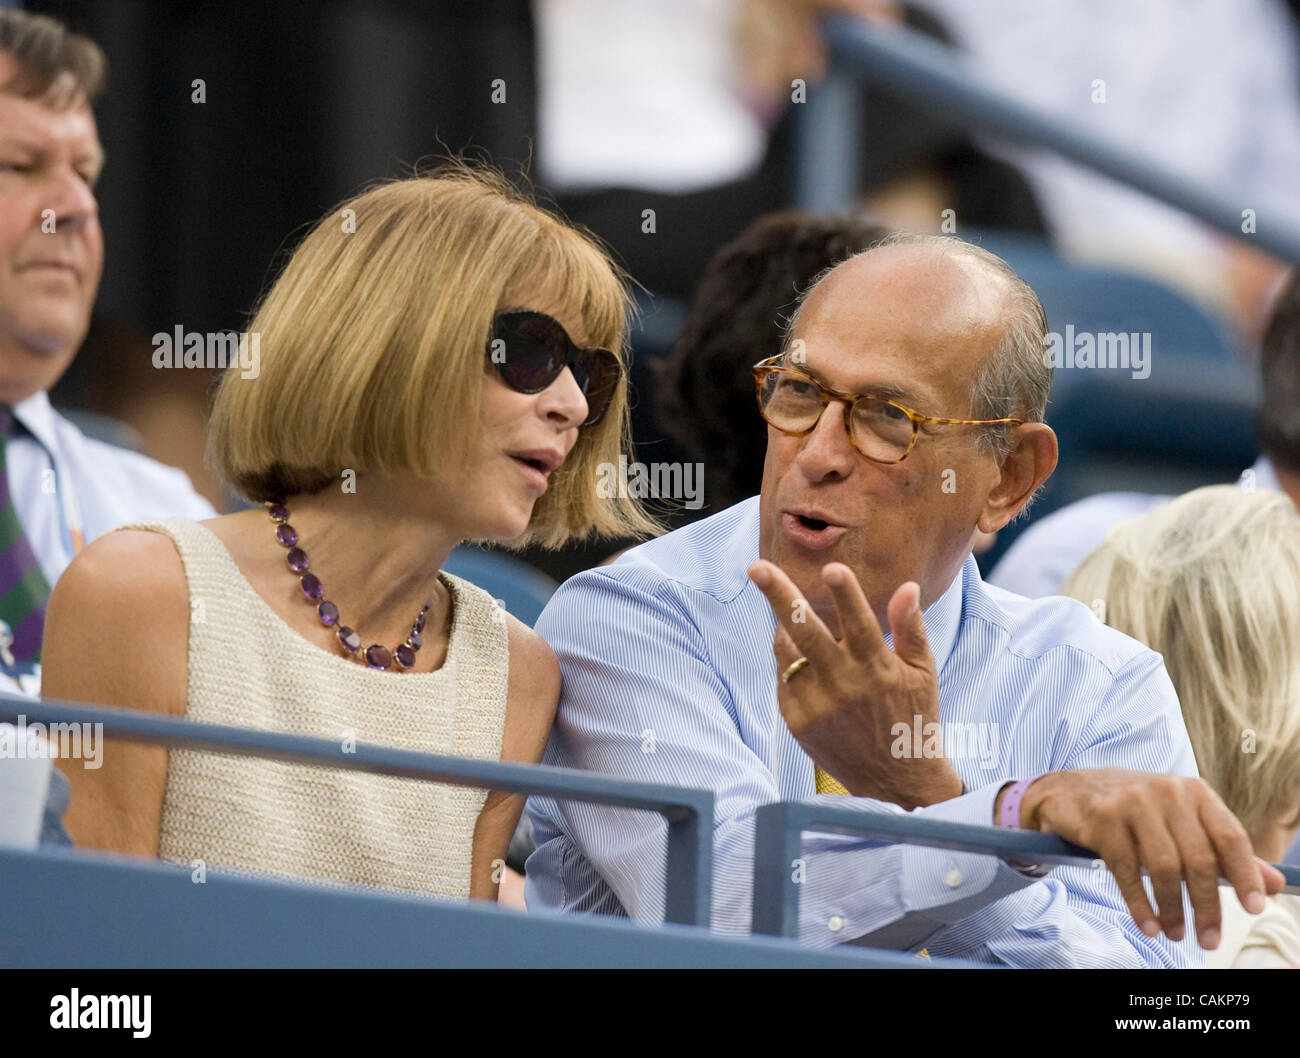 Anna Wintour talks to Oscar De La Renta as  Roger Federer defeats Novak Djokovic for his fourth straight title  at the 2007 US Open Tennis Championships men's final.  Dustin Hoffman and Chevy Chase are also seated in the President's Box. Stock Photo